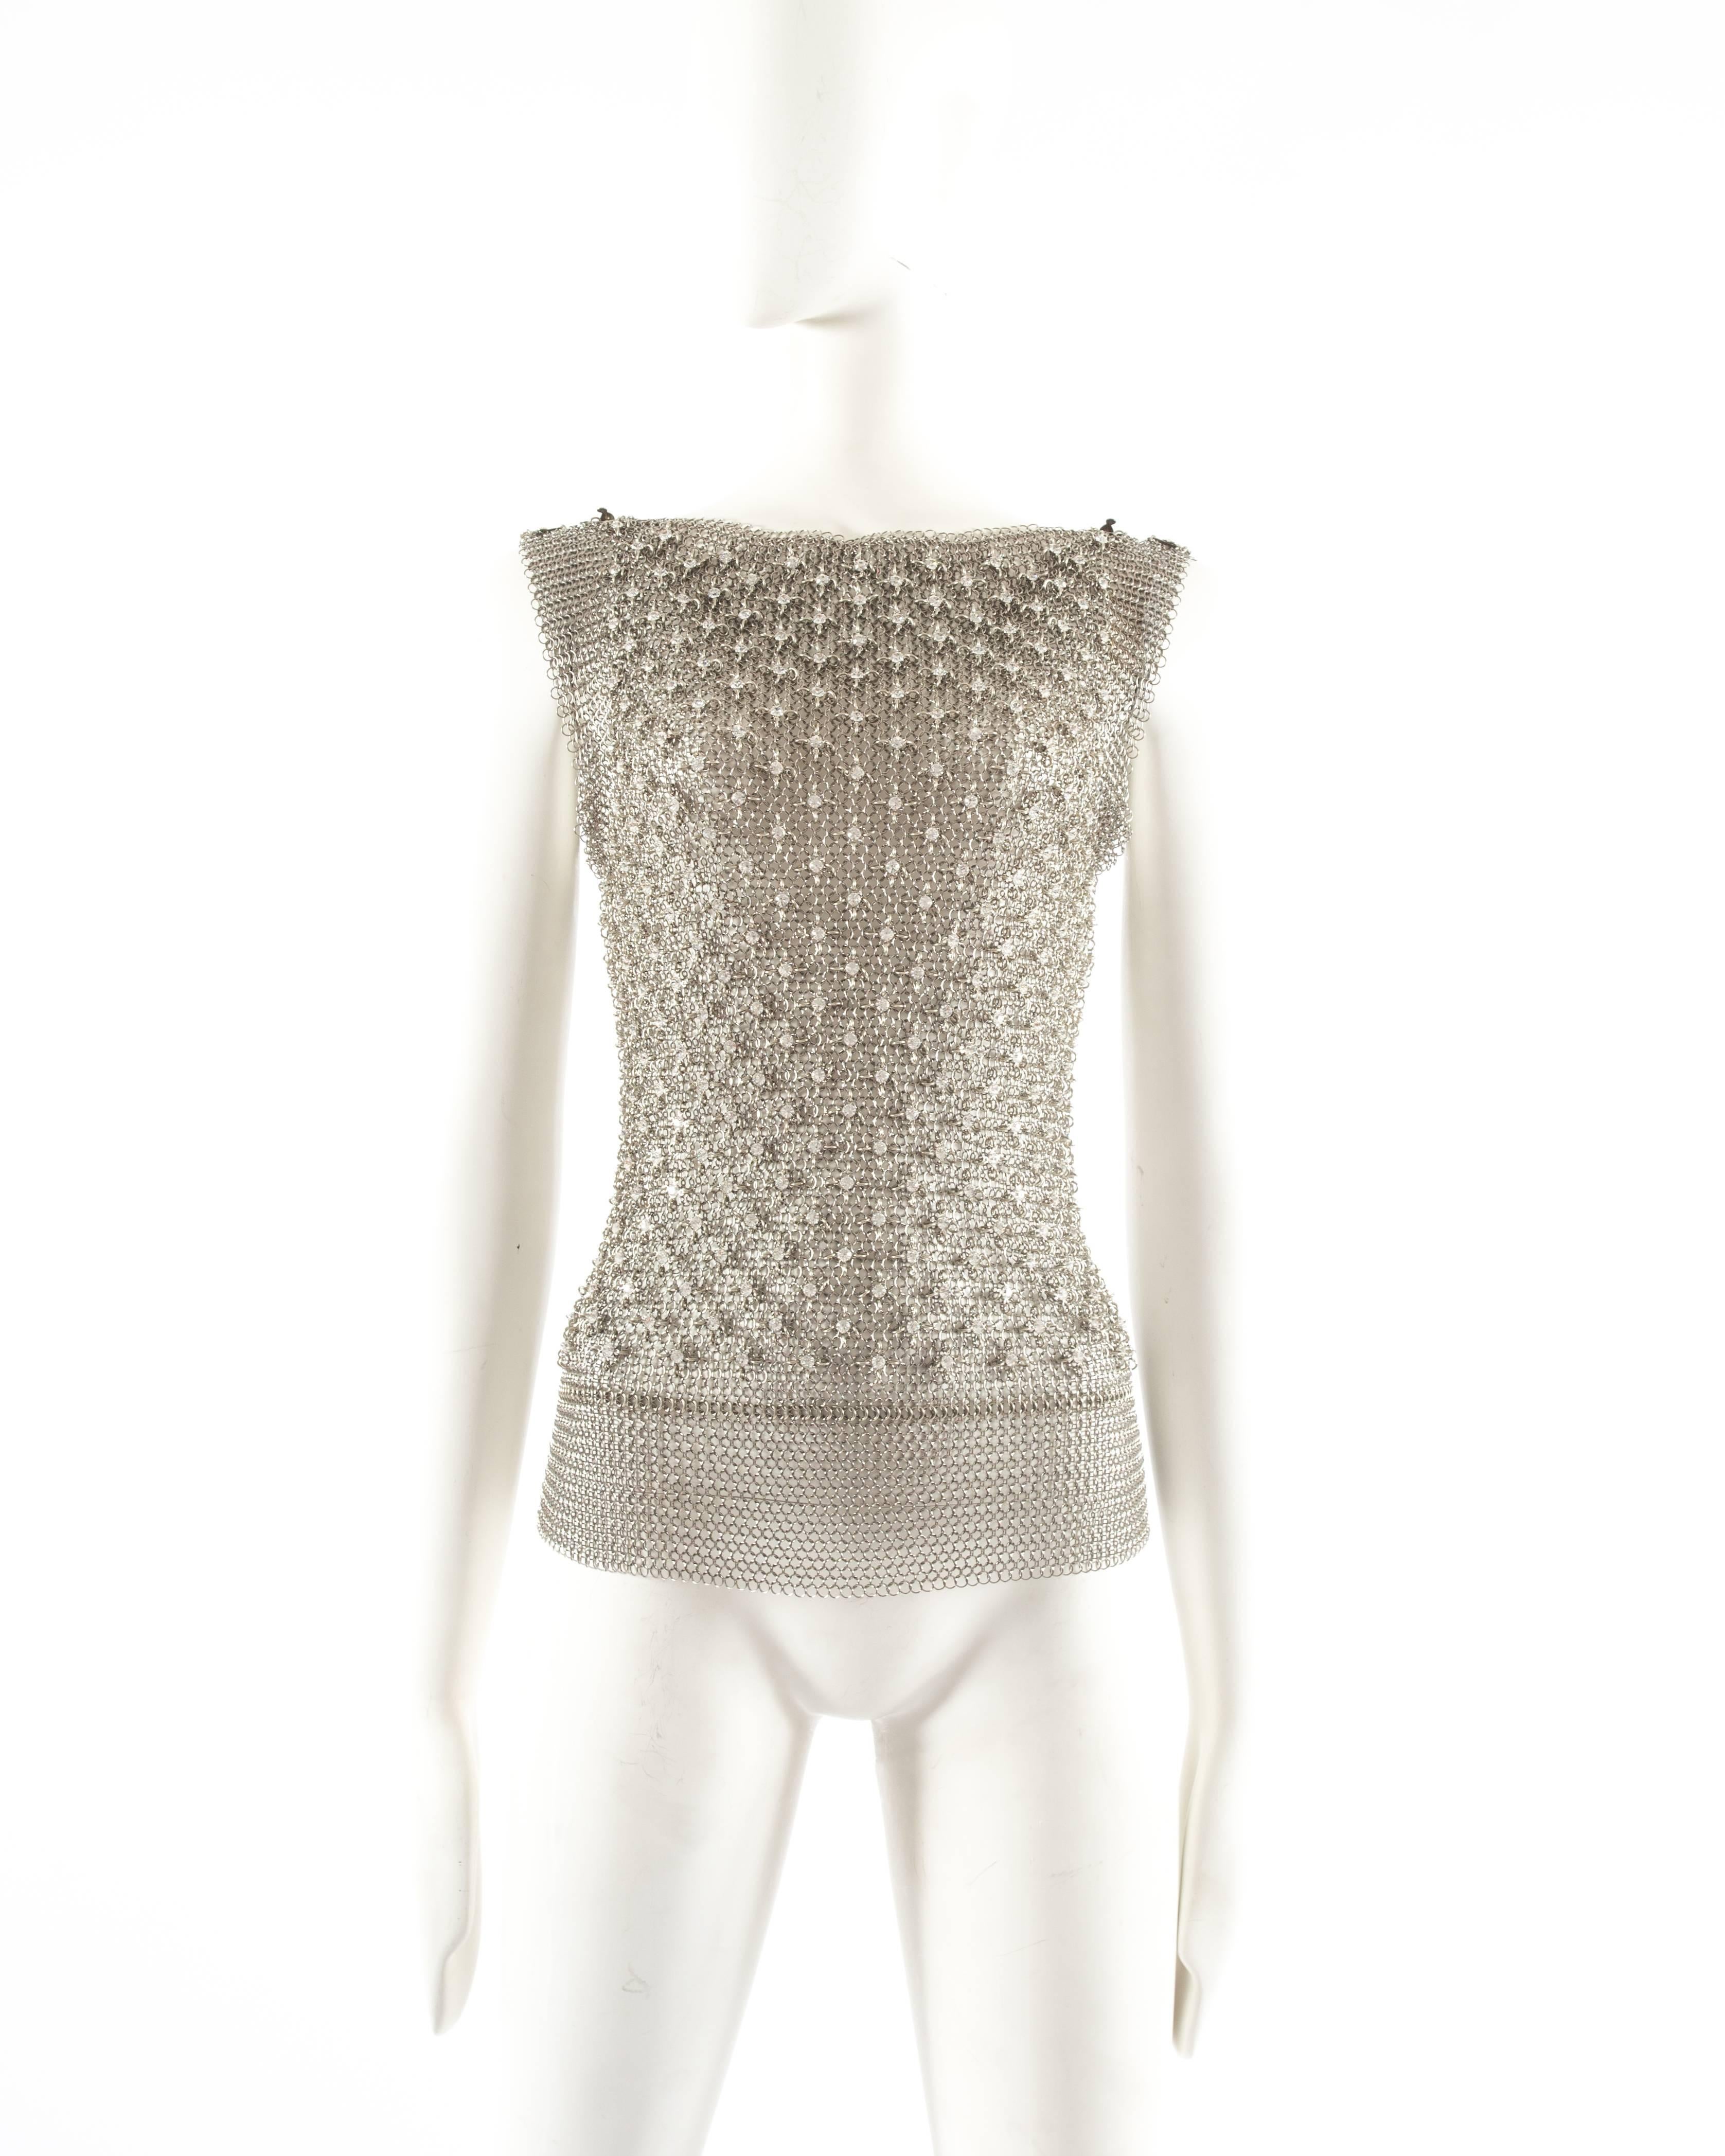 Paco Rabanne silver metal chainmail vest 

- four metal clasp closures on the shoulders
- over 400 studded Swarovski crystals on the front